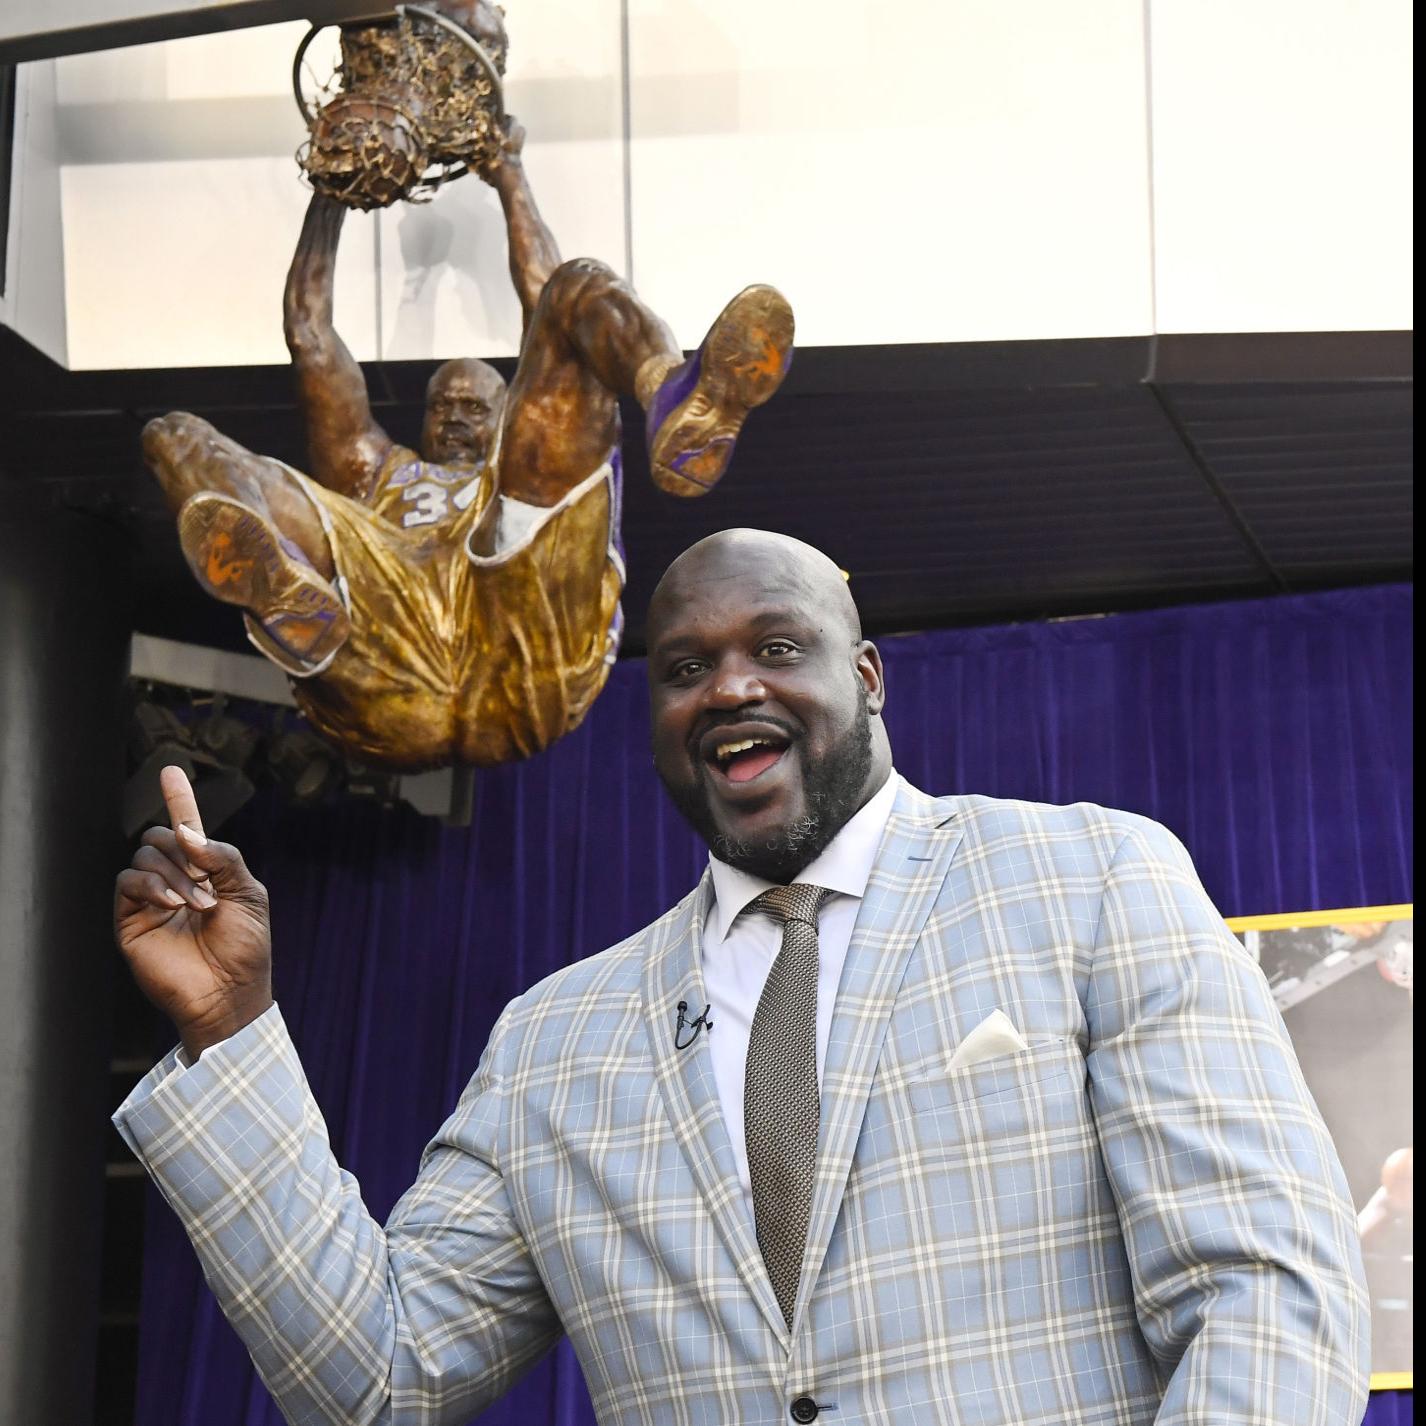 The Lakers will honor Shaquille O'Neal with this gold-plated dunking statue  